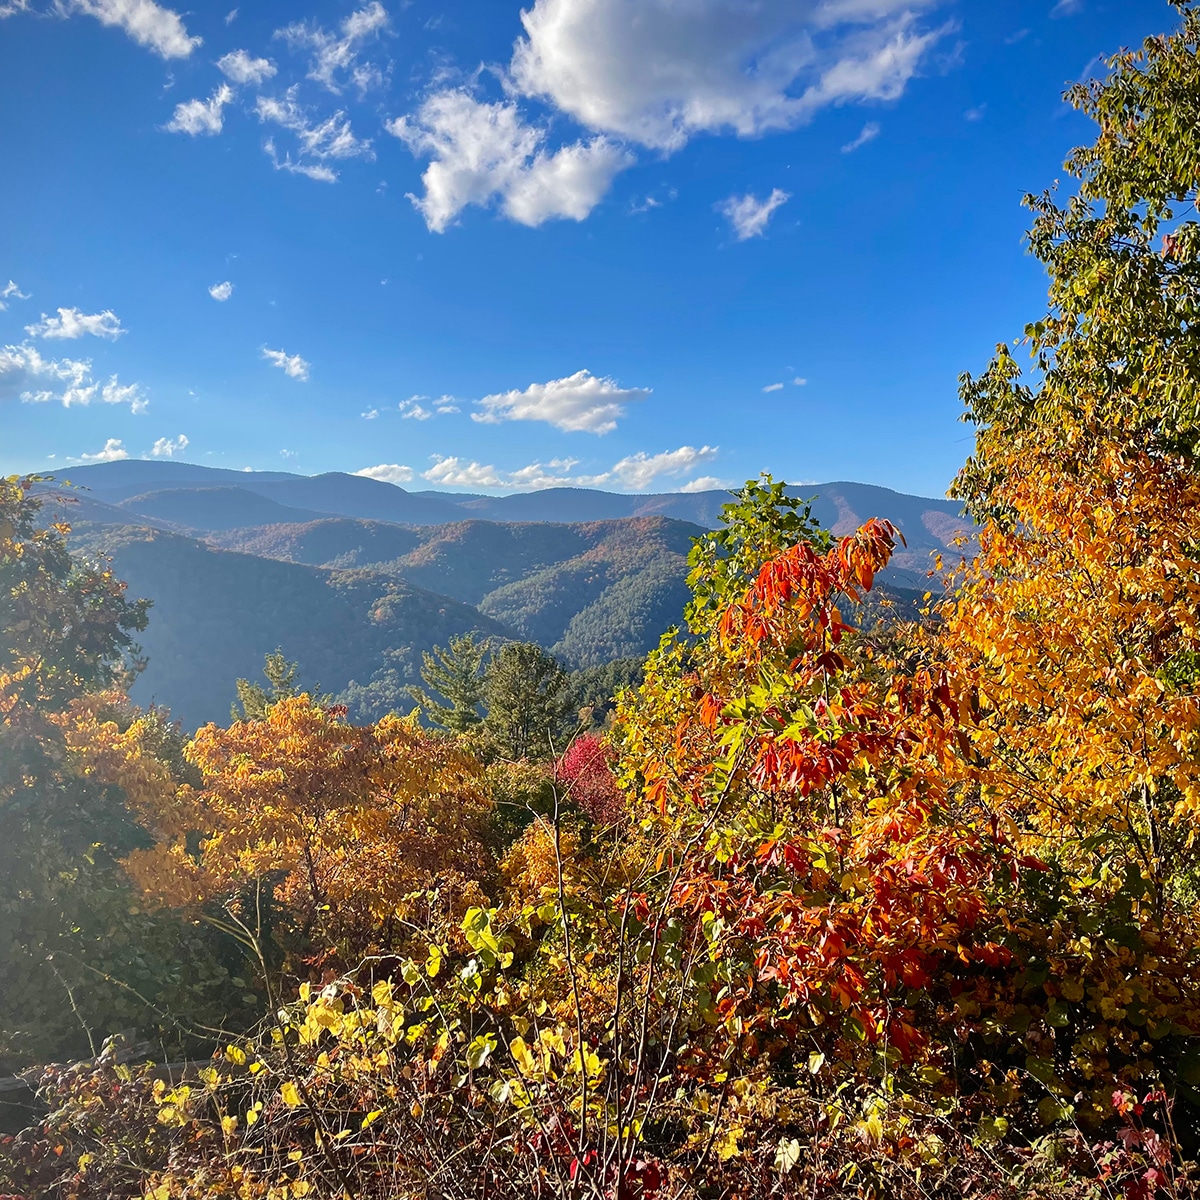 An incredible view of rolling hills and colorful fall leaves from the road leading in to the Cataloochee Valley in Great Smoky Mountains National Park.